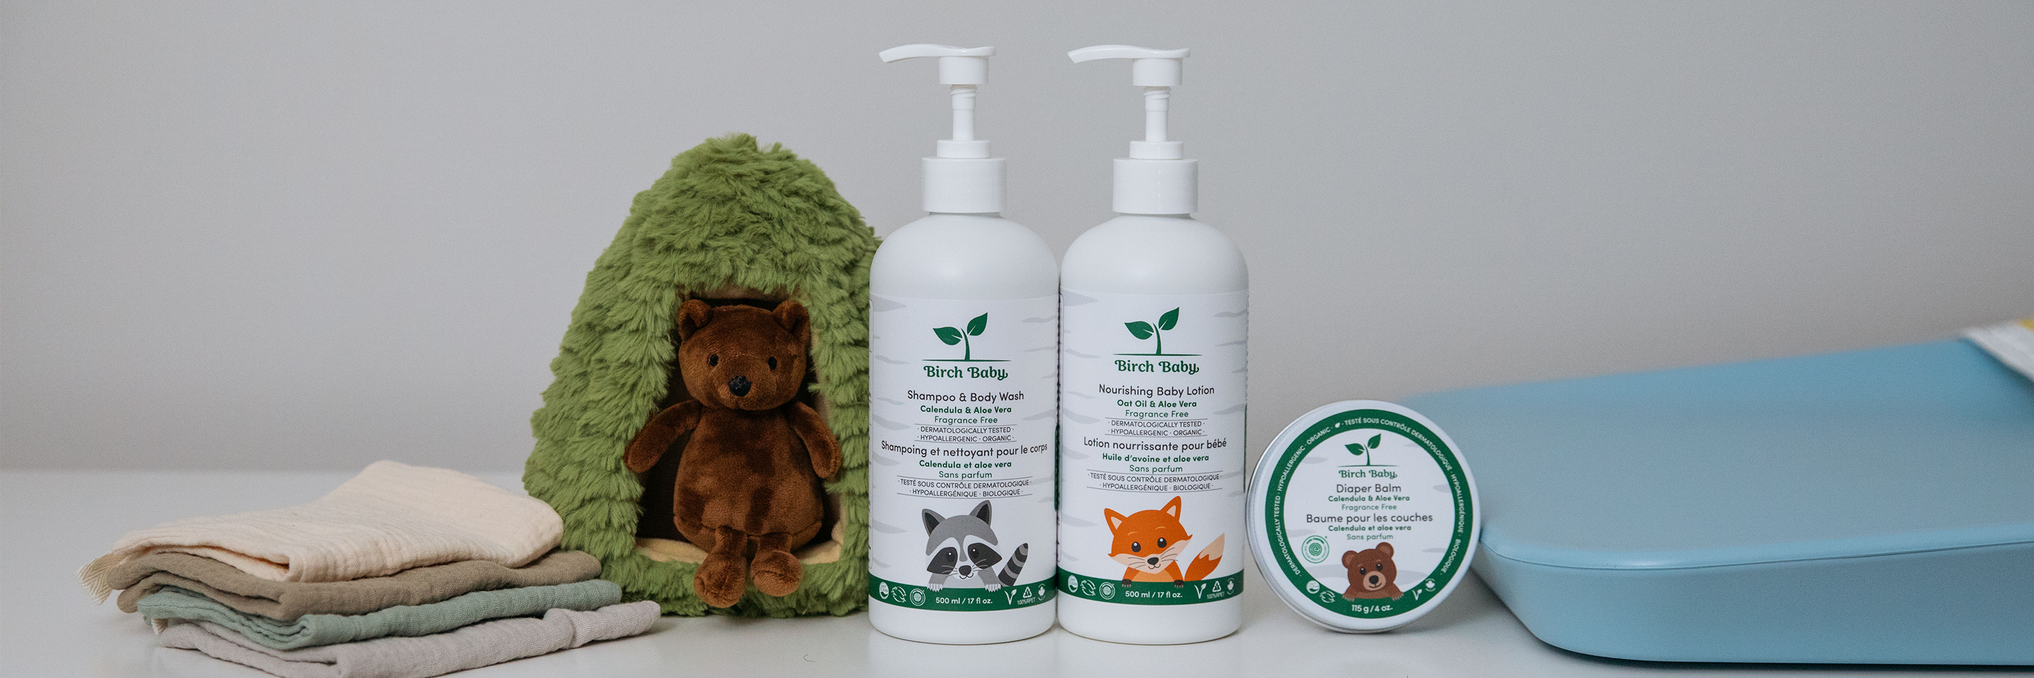 birch-baby-all-natural-skincare-family